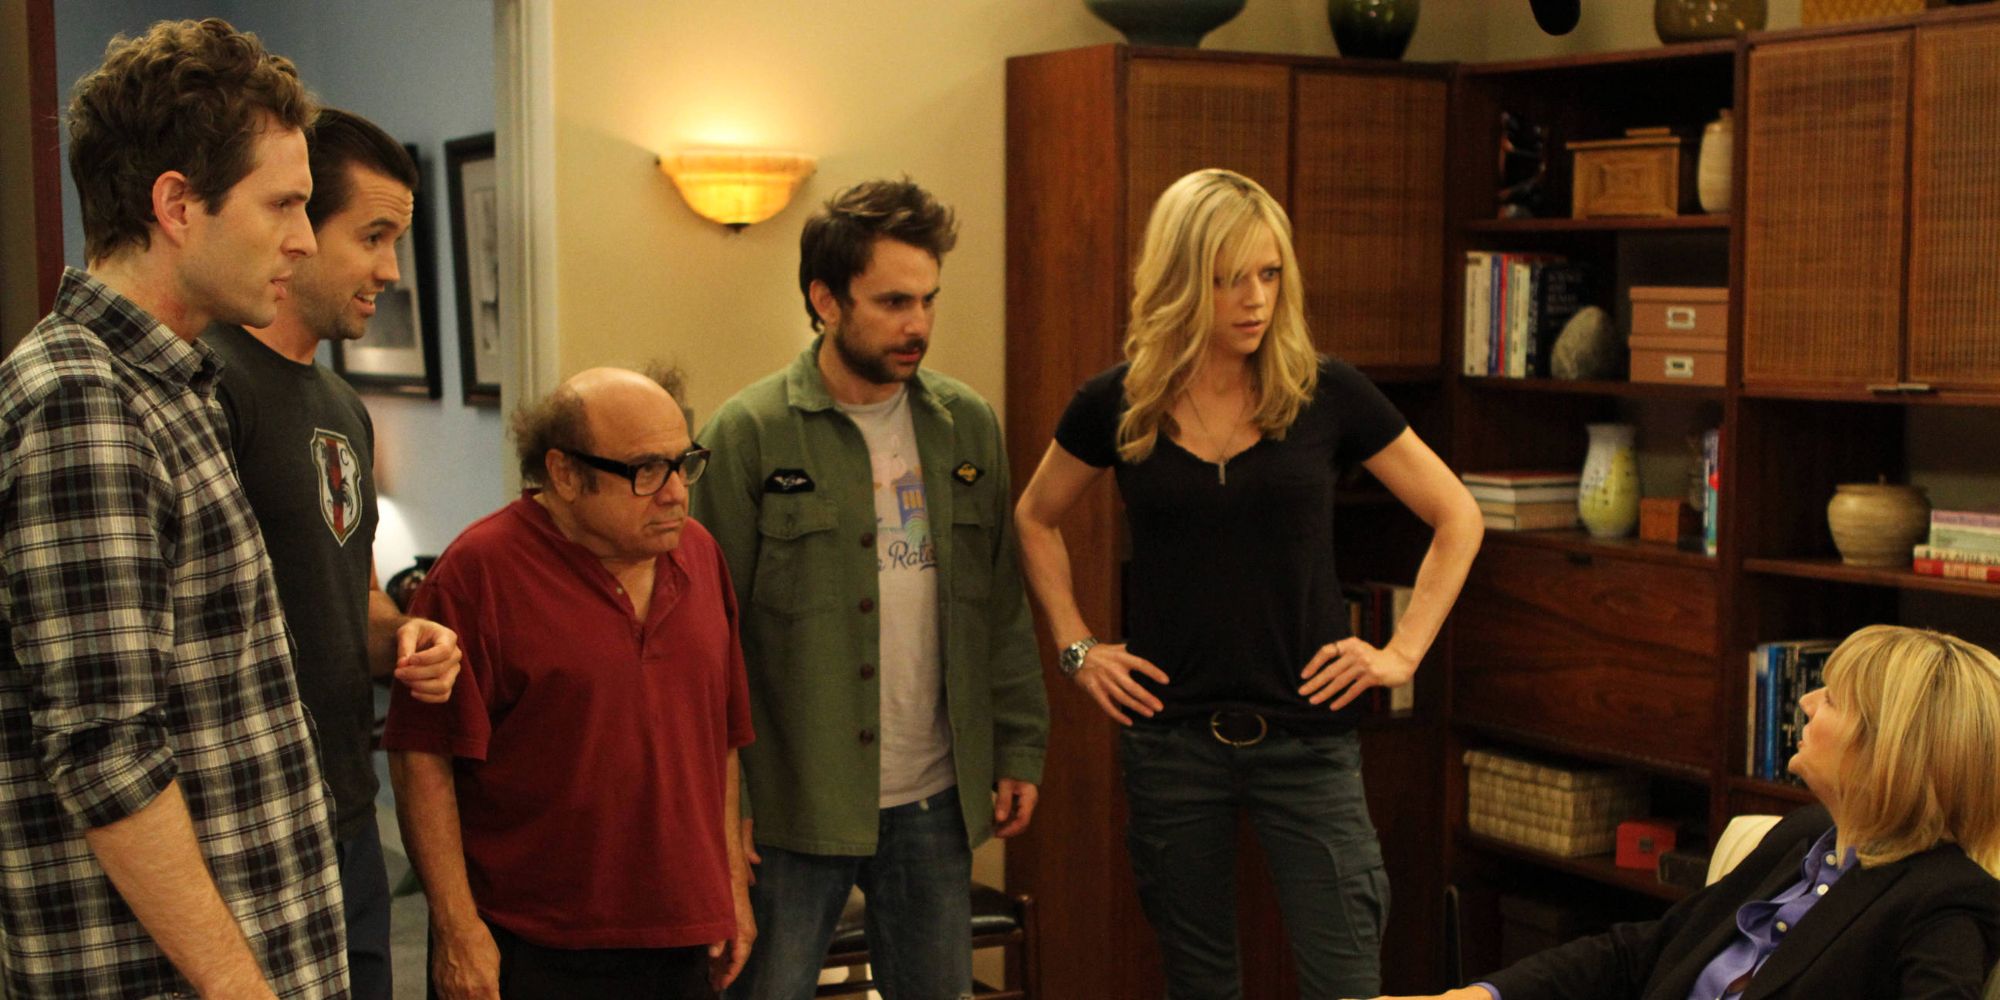 The gang looking at the therapist in It's Always Sunny in Philadelphia.